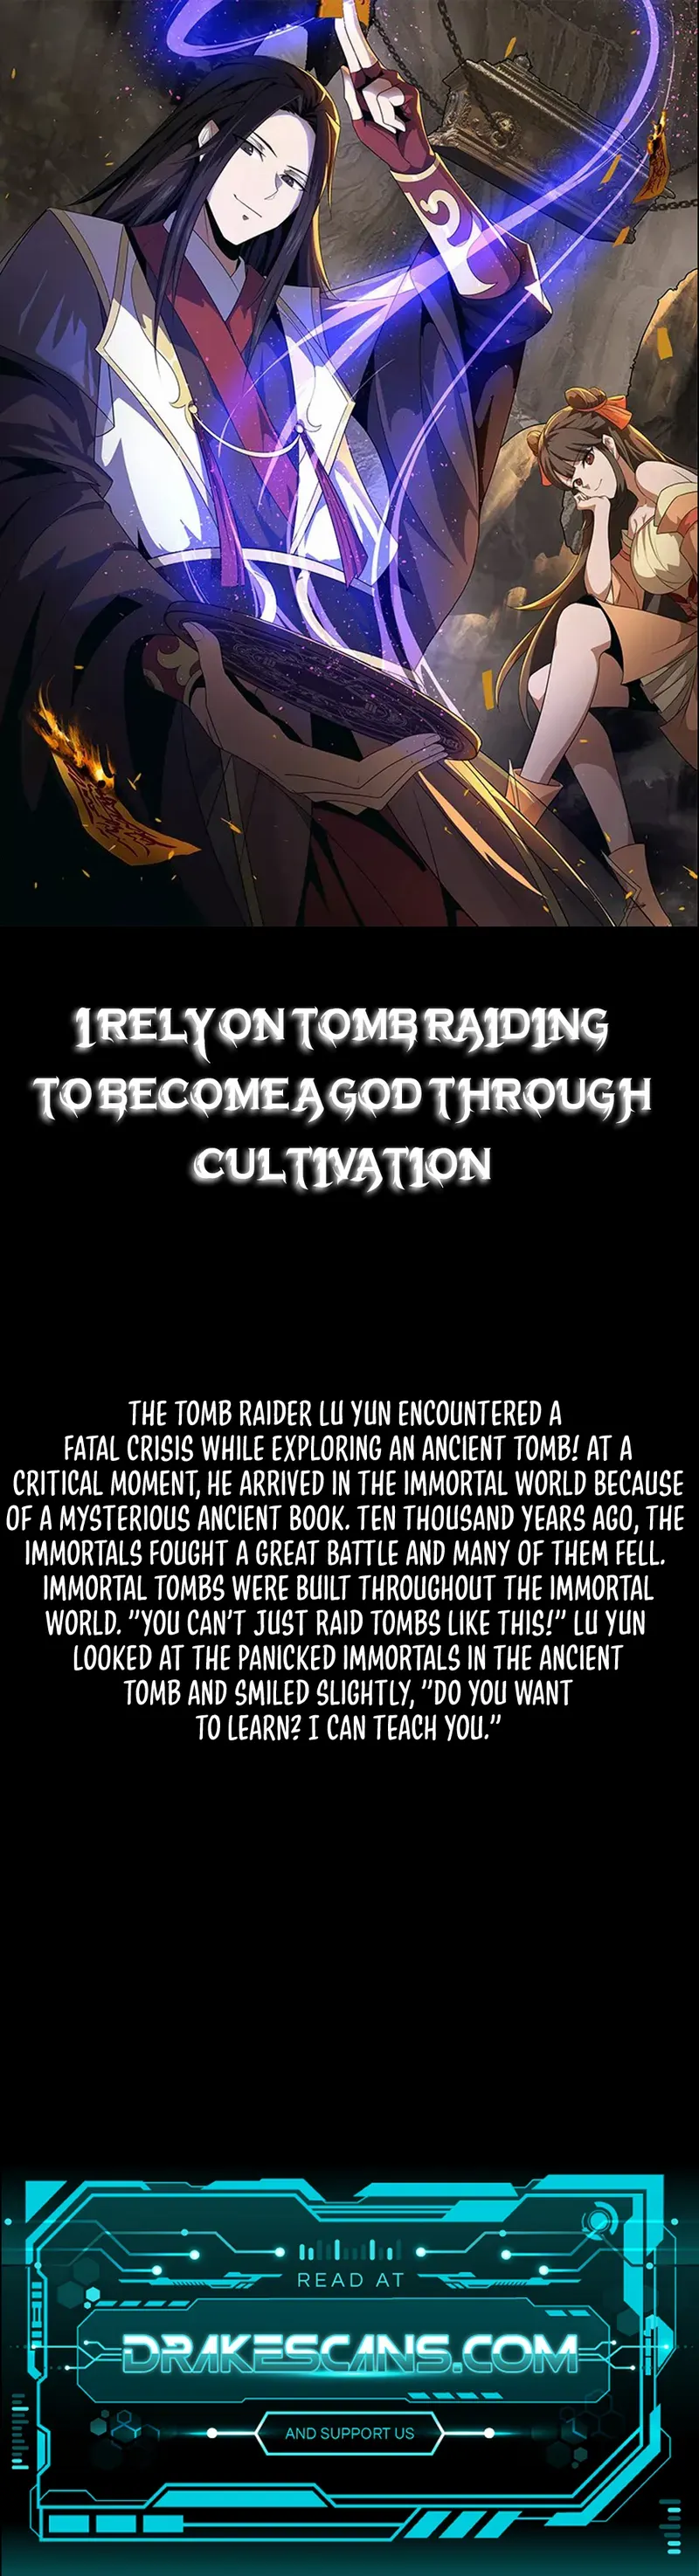 I Rely On Tomb Raiding To Become A God Through Cultivation - Page 2